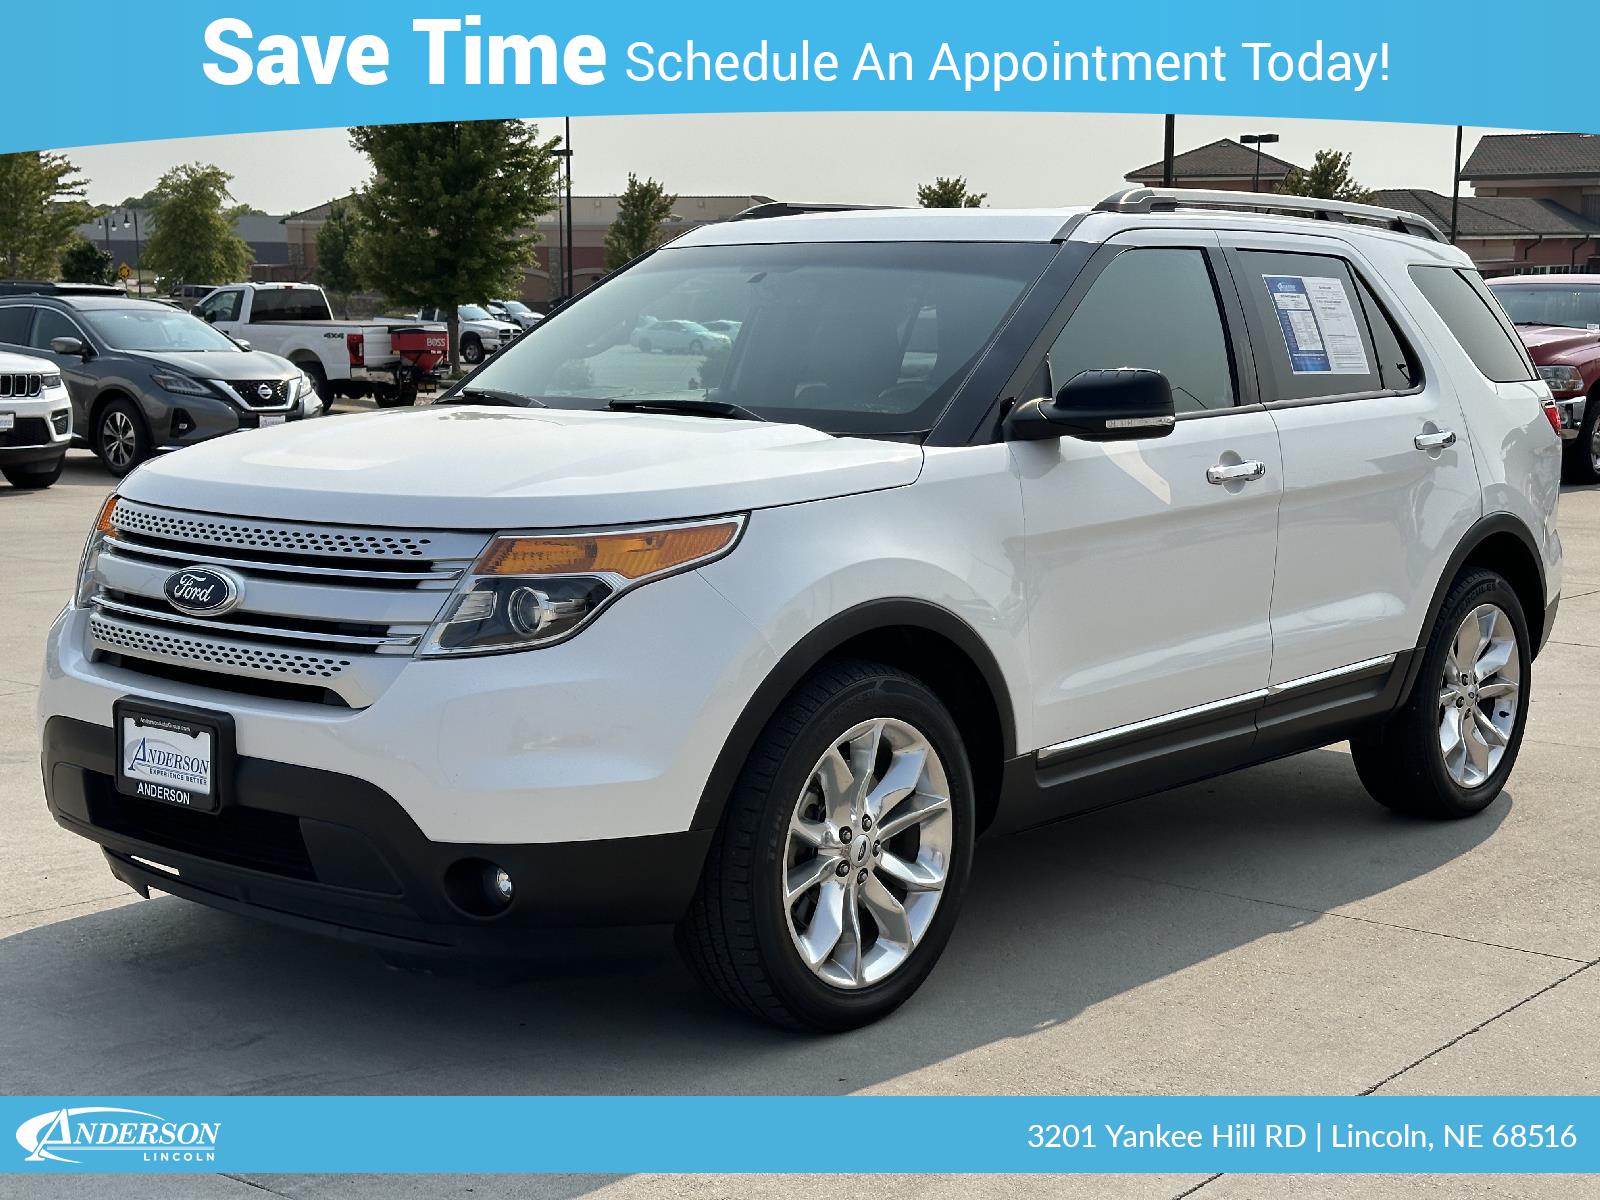 Used 2013 Ford Explorer XLT Stock: 4002202A